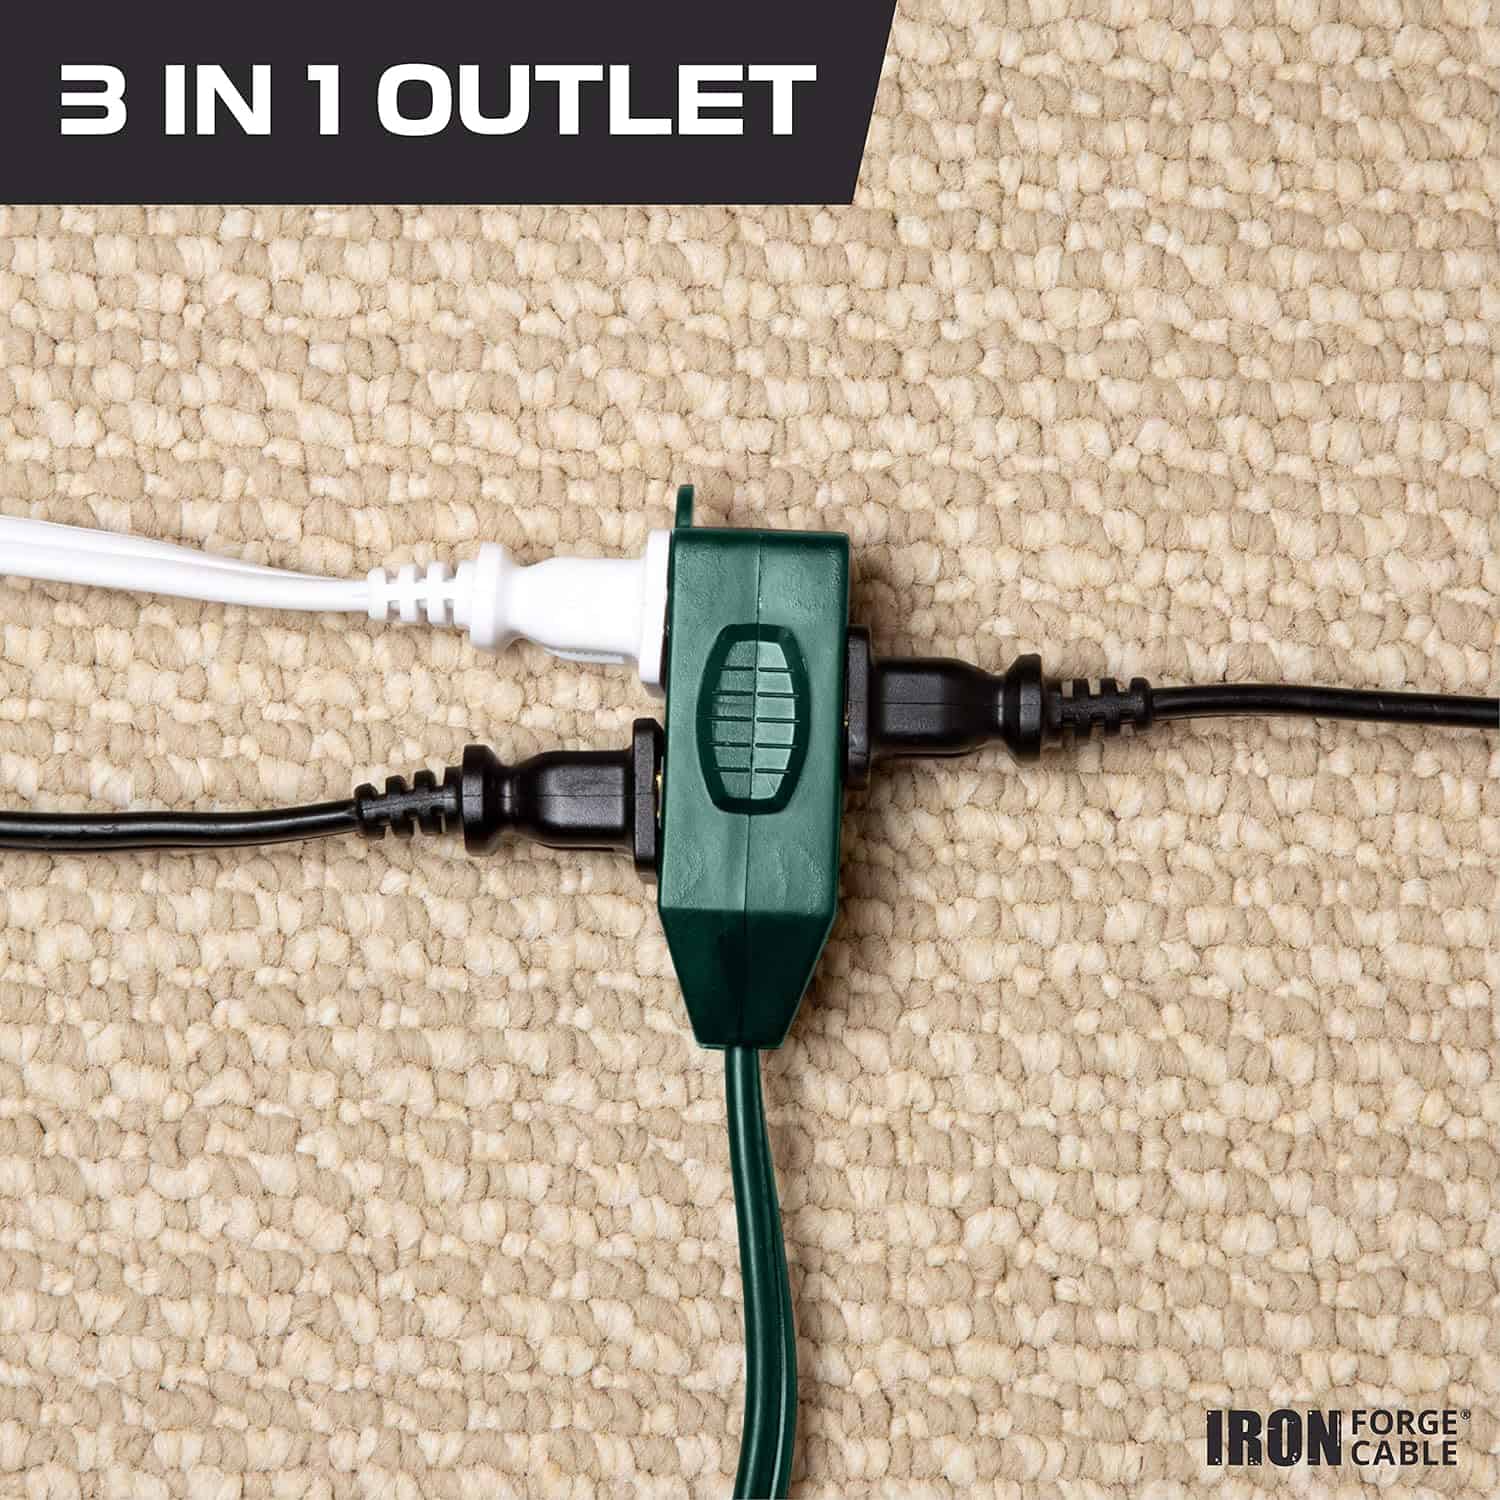 Iron Forge Cable 20 Ft Green Extension Cord with 3 Outlets 16 2 Indoor Extension Cord with Multiple Outlets 13 AMP 2 Prong Electrical Cable for Home Office Household Appliances 5